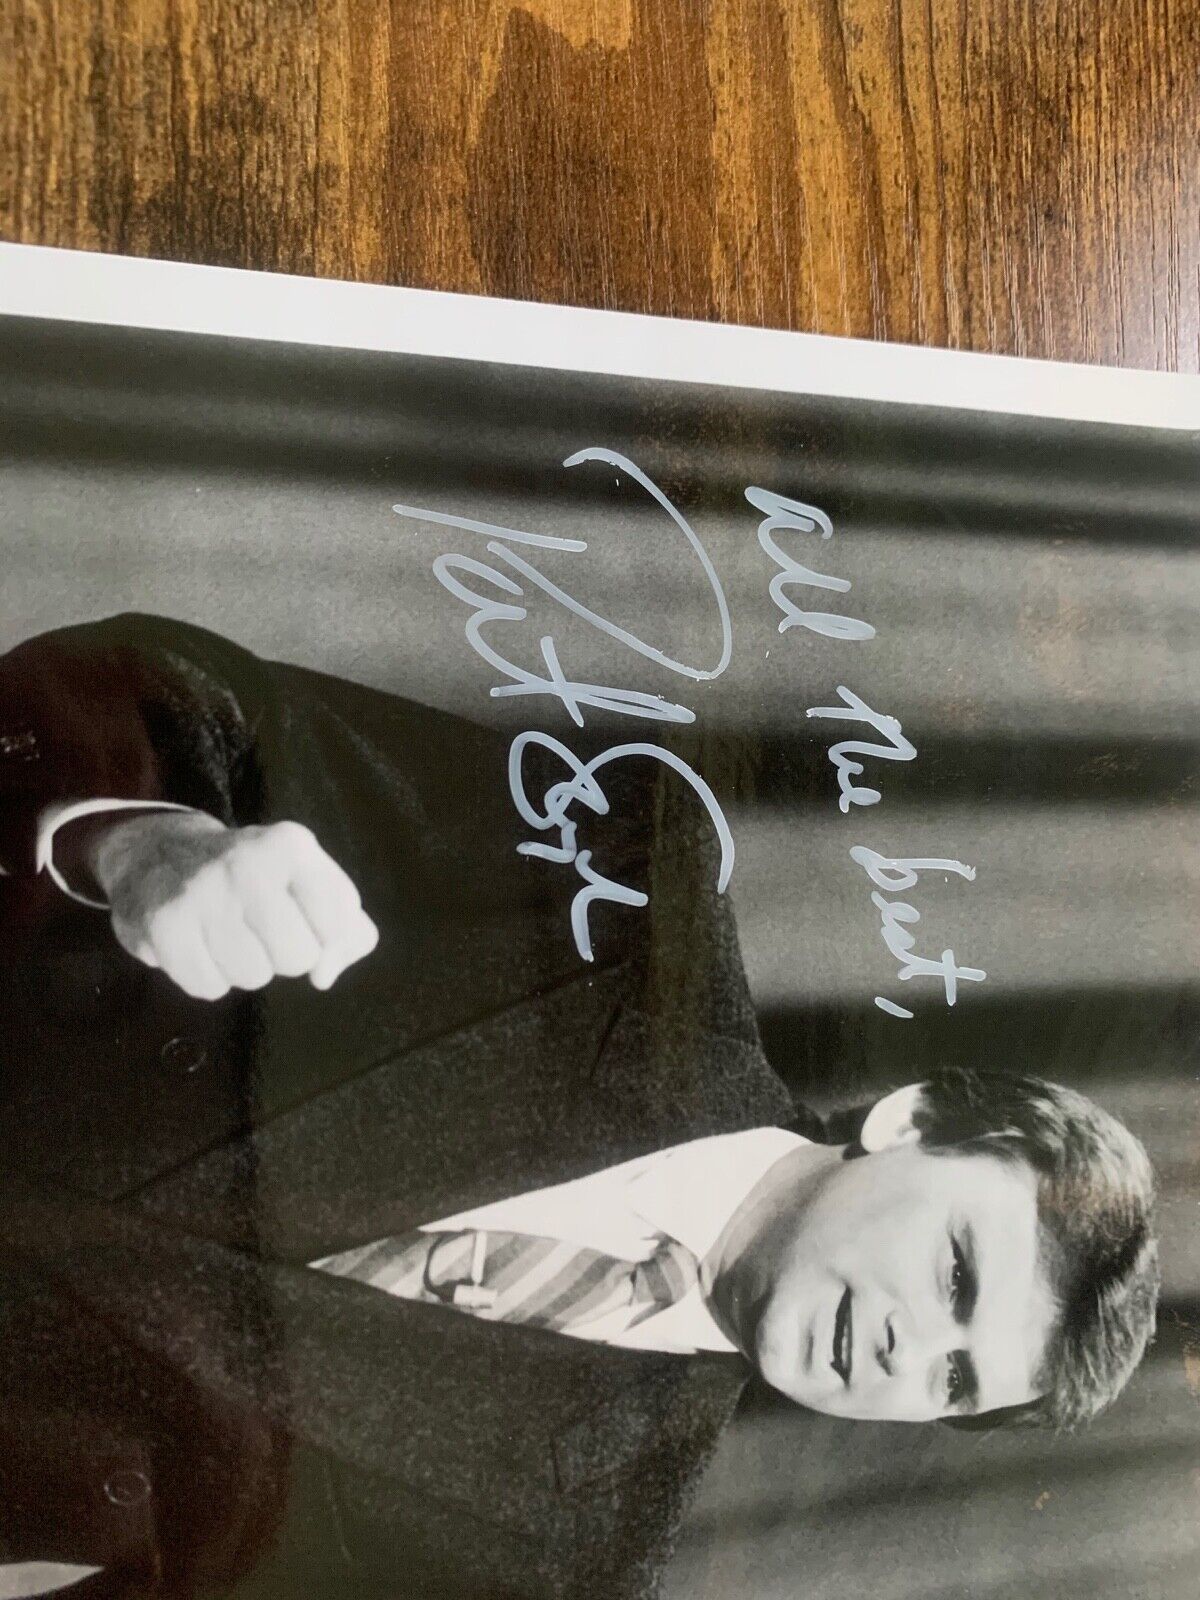 8x10 Vintage B&W Photo Autographed by Pat Sajak from 'Wheel Of Fortune' JSA COA